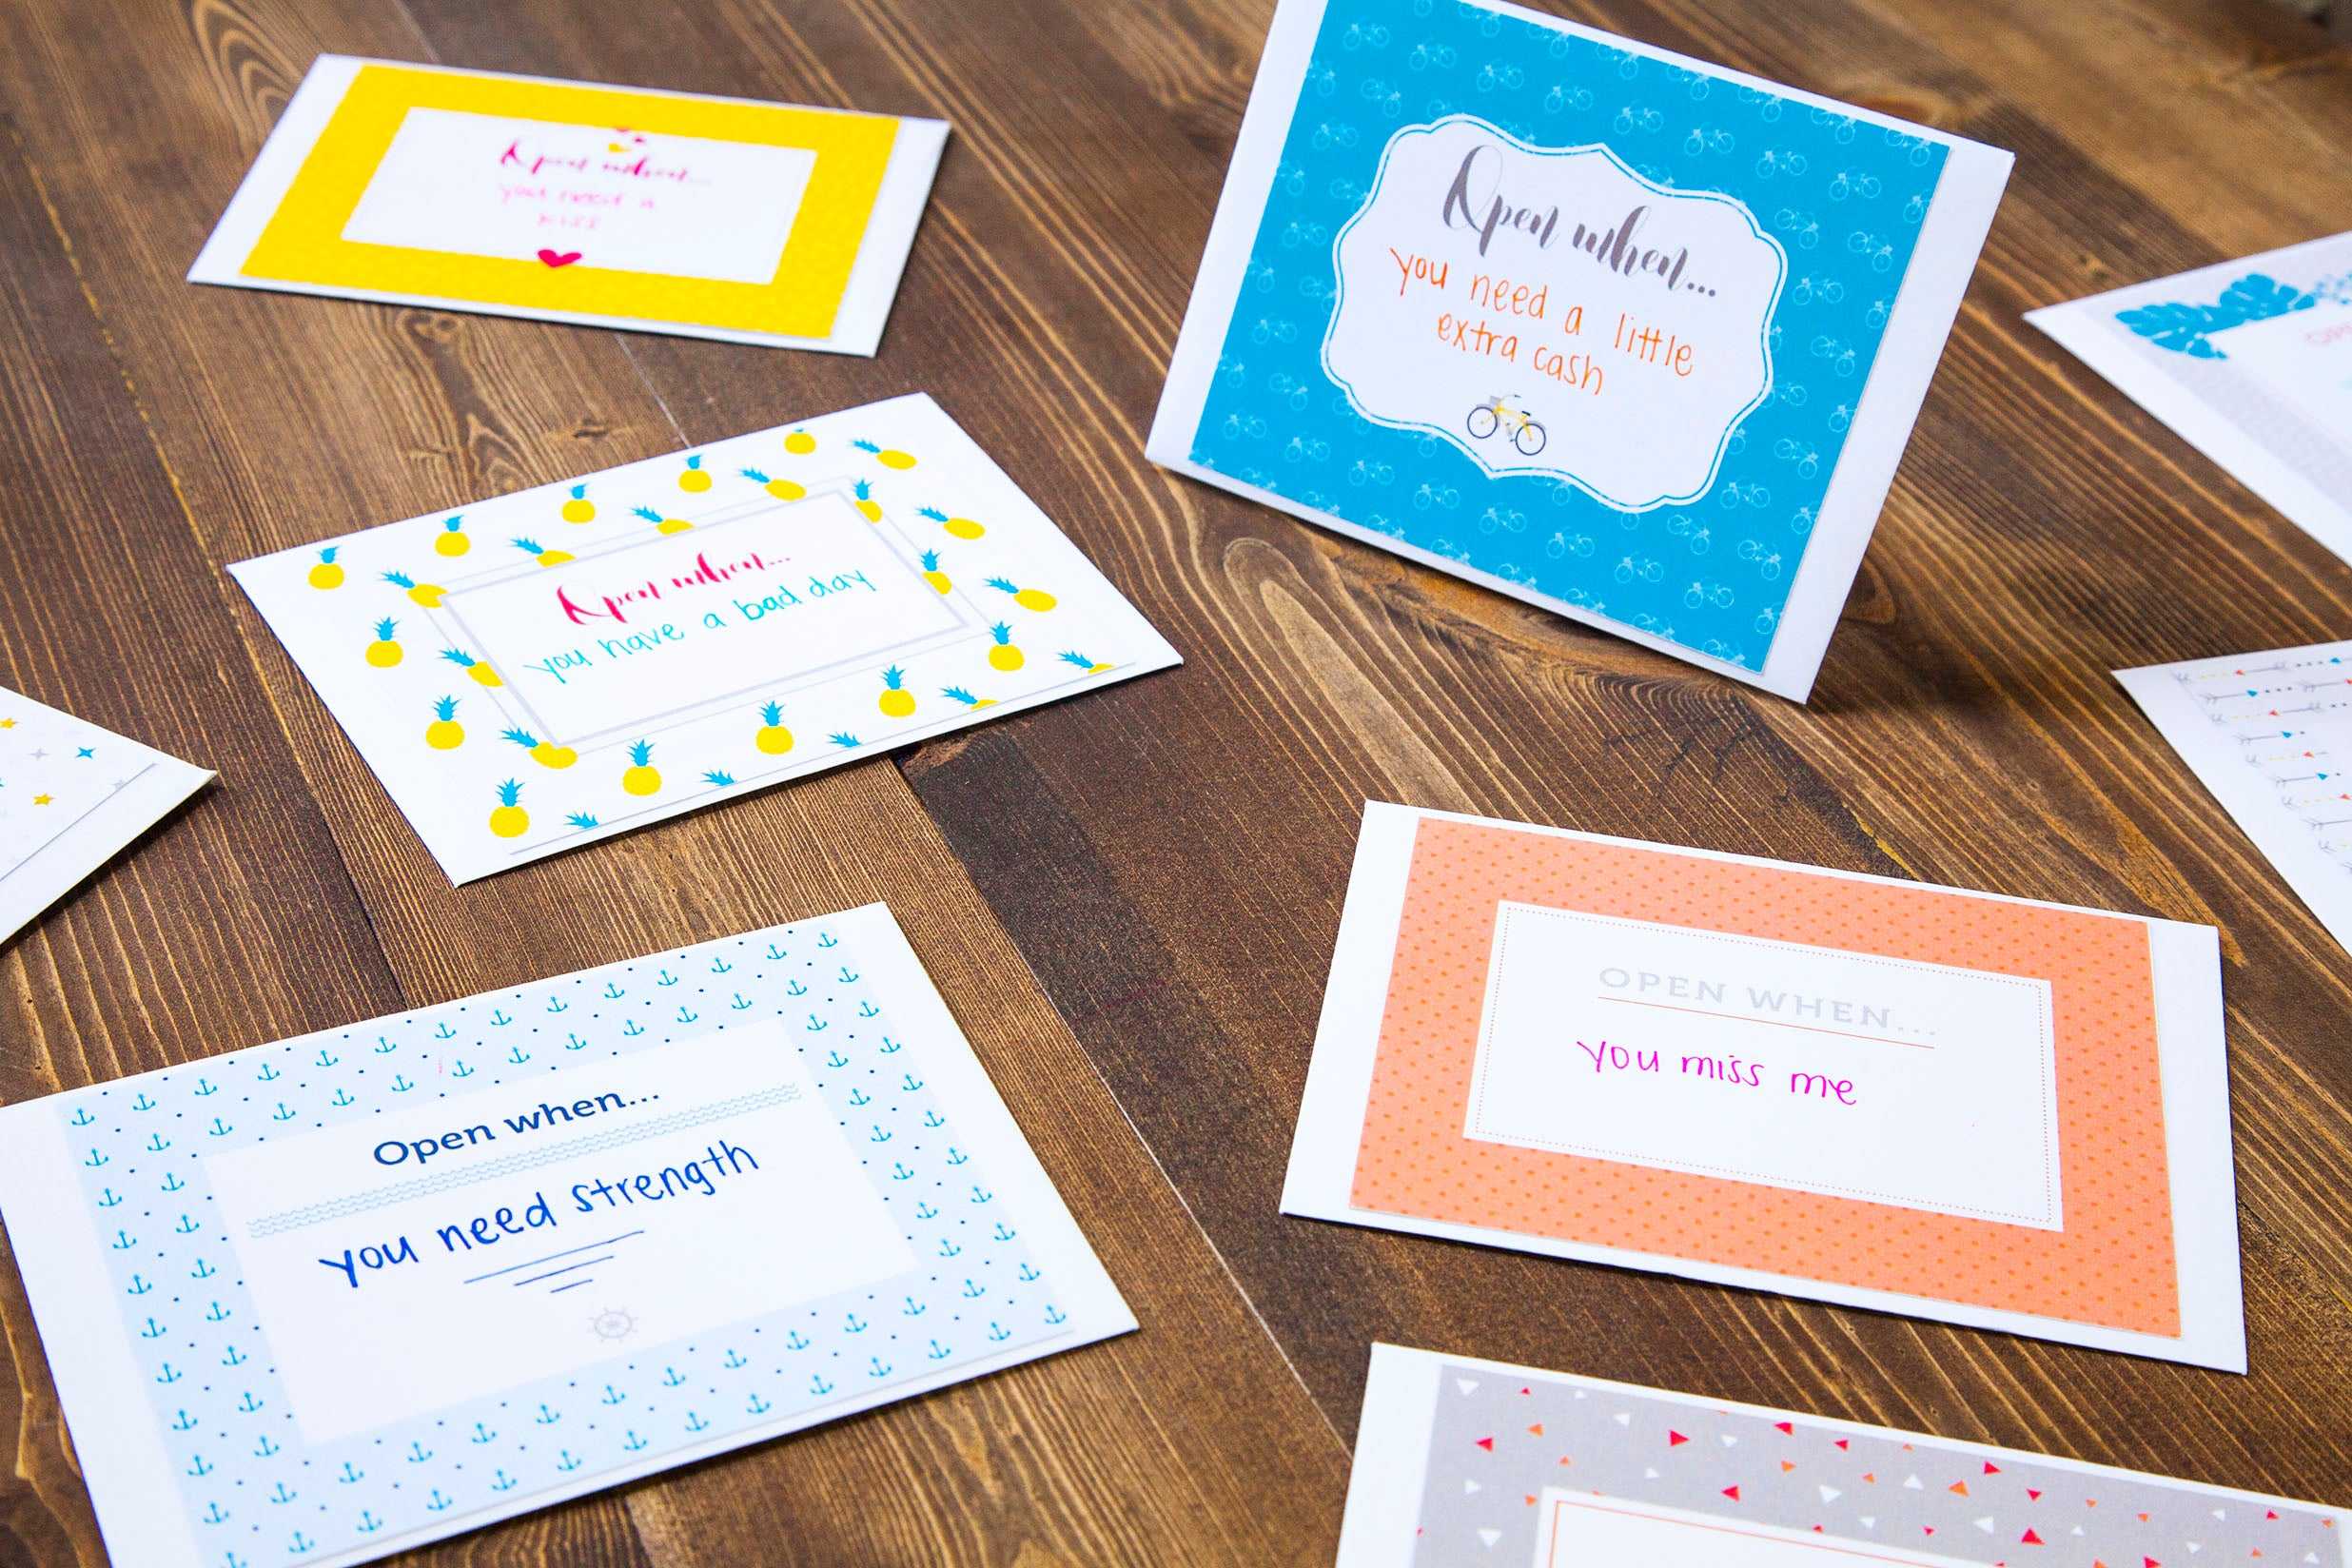 Open When Letters: 280 Ideas + Printables – Shari's Berries Blog Throughout 52 Things I Love About You Cards Template